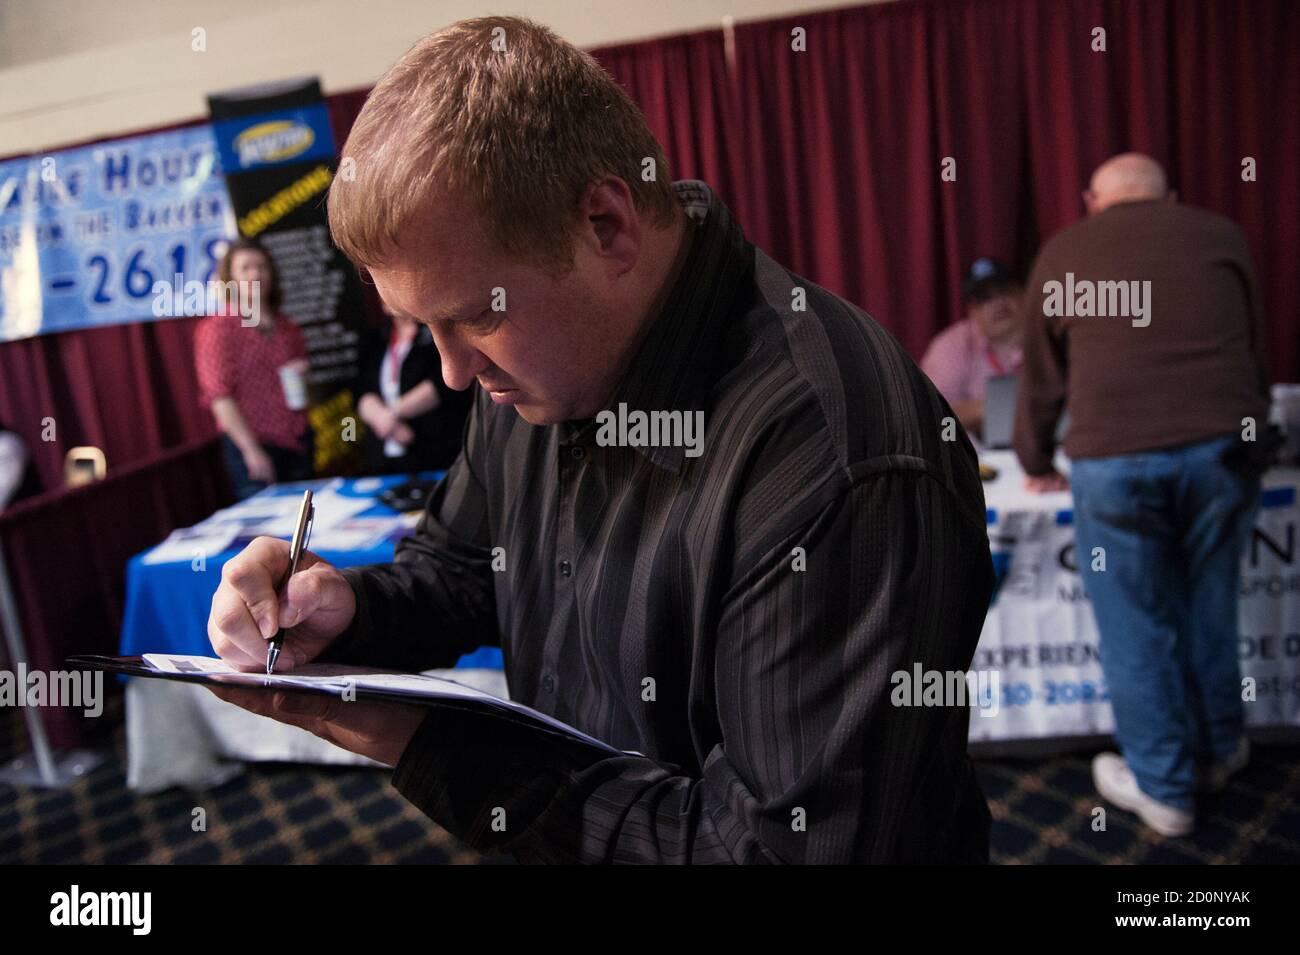 Ben Hinshaw, who came from Minnesota to attend a job fair in Williston, North Dakota March 11, 2015, fills out a form. REUTERS/Andrew Cullen    (UNITED STATES - Tags: BUSINESS EMPLOYMENT) Stock Photo